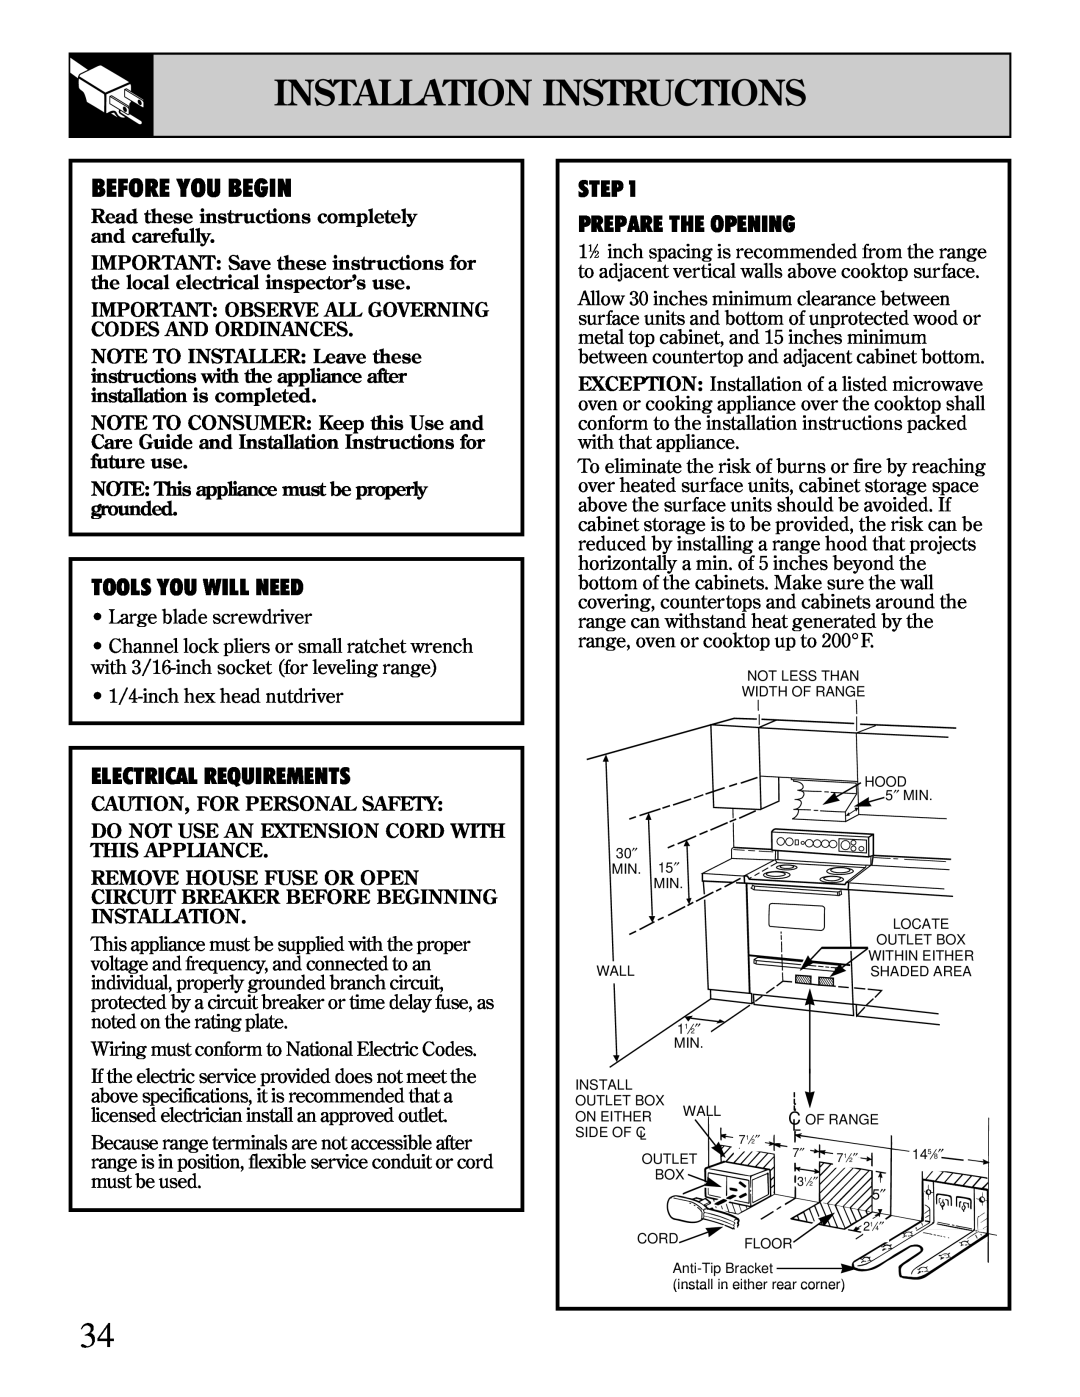 GE 49-8723 warranty Installation Instructions, Tools You Will Need, Electrical Requirements, Step Prepare The Opening 